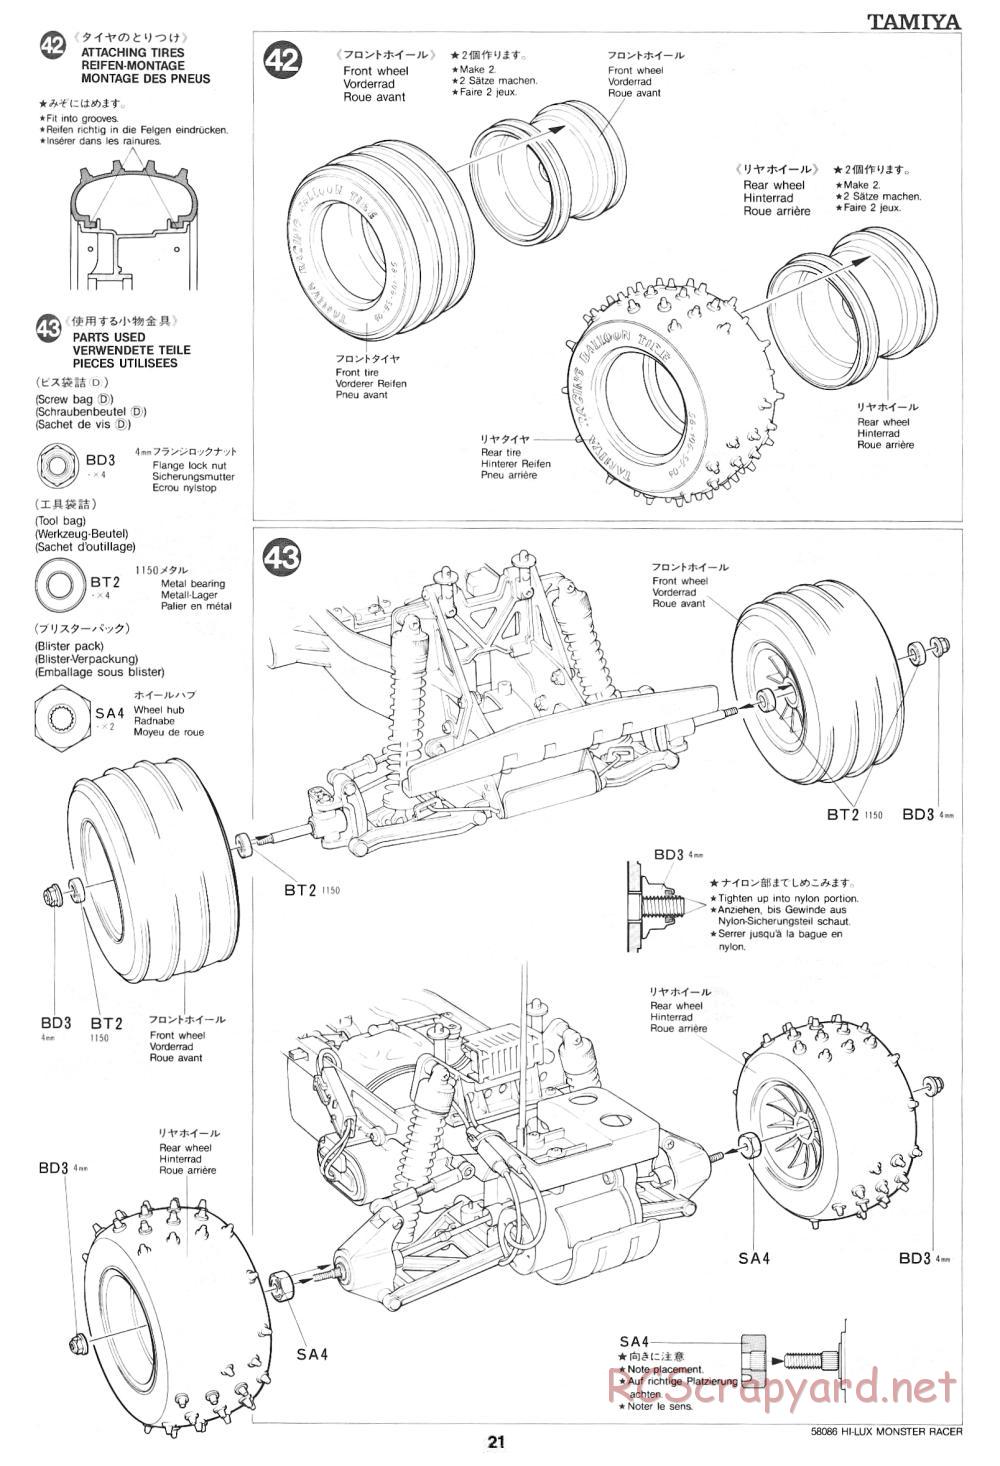 Tamiya - Toyota Hilux Monster Racer - 58086 - Manual - Page 21